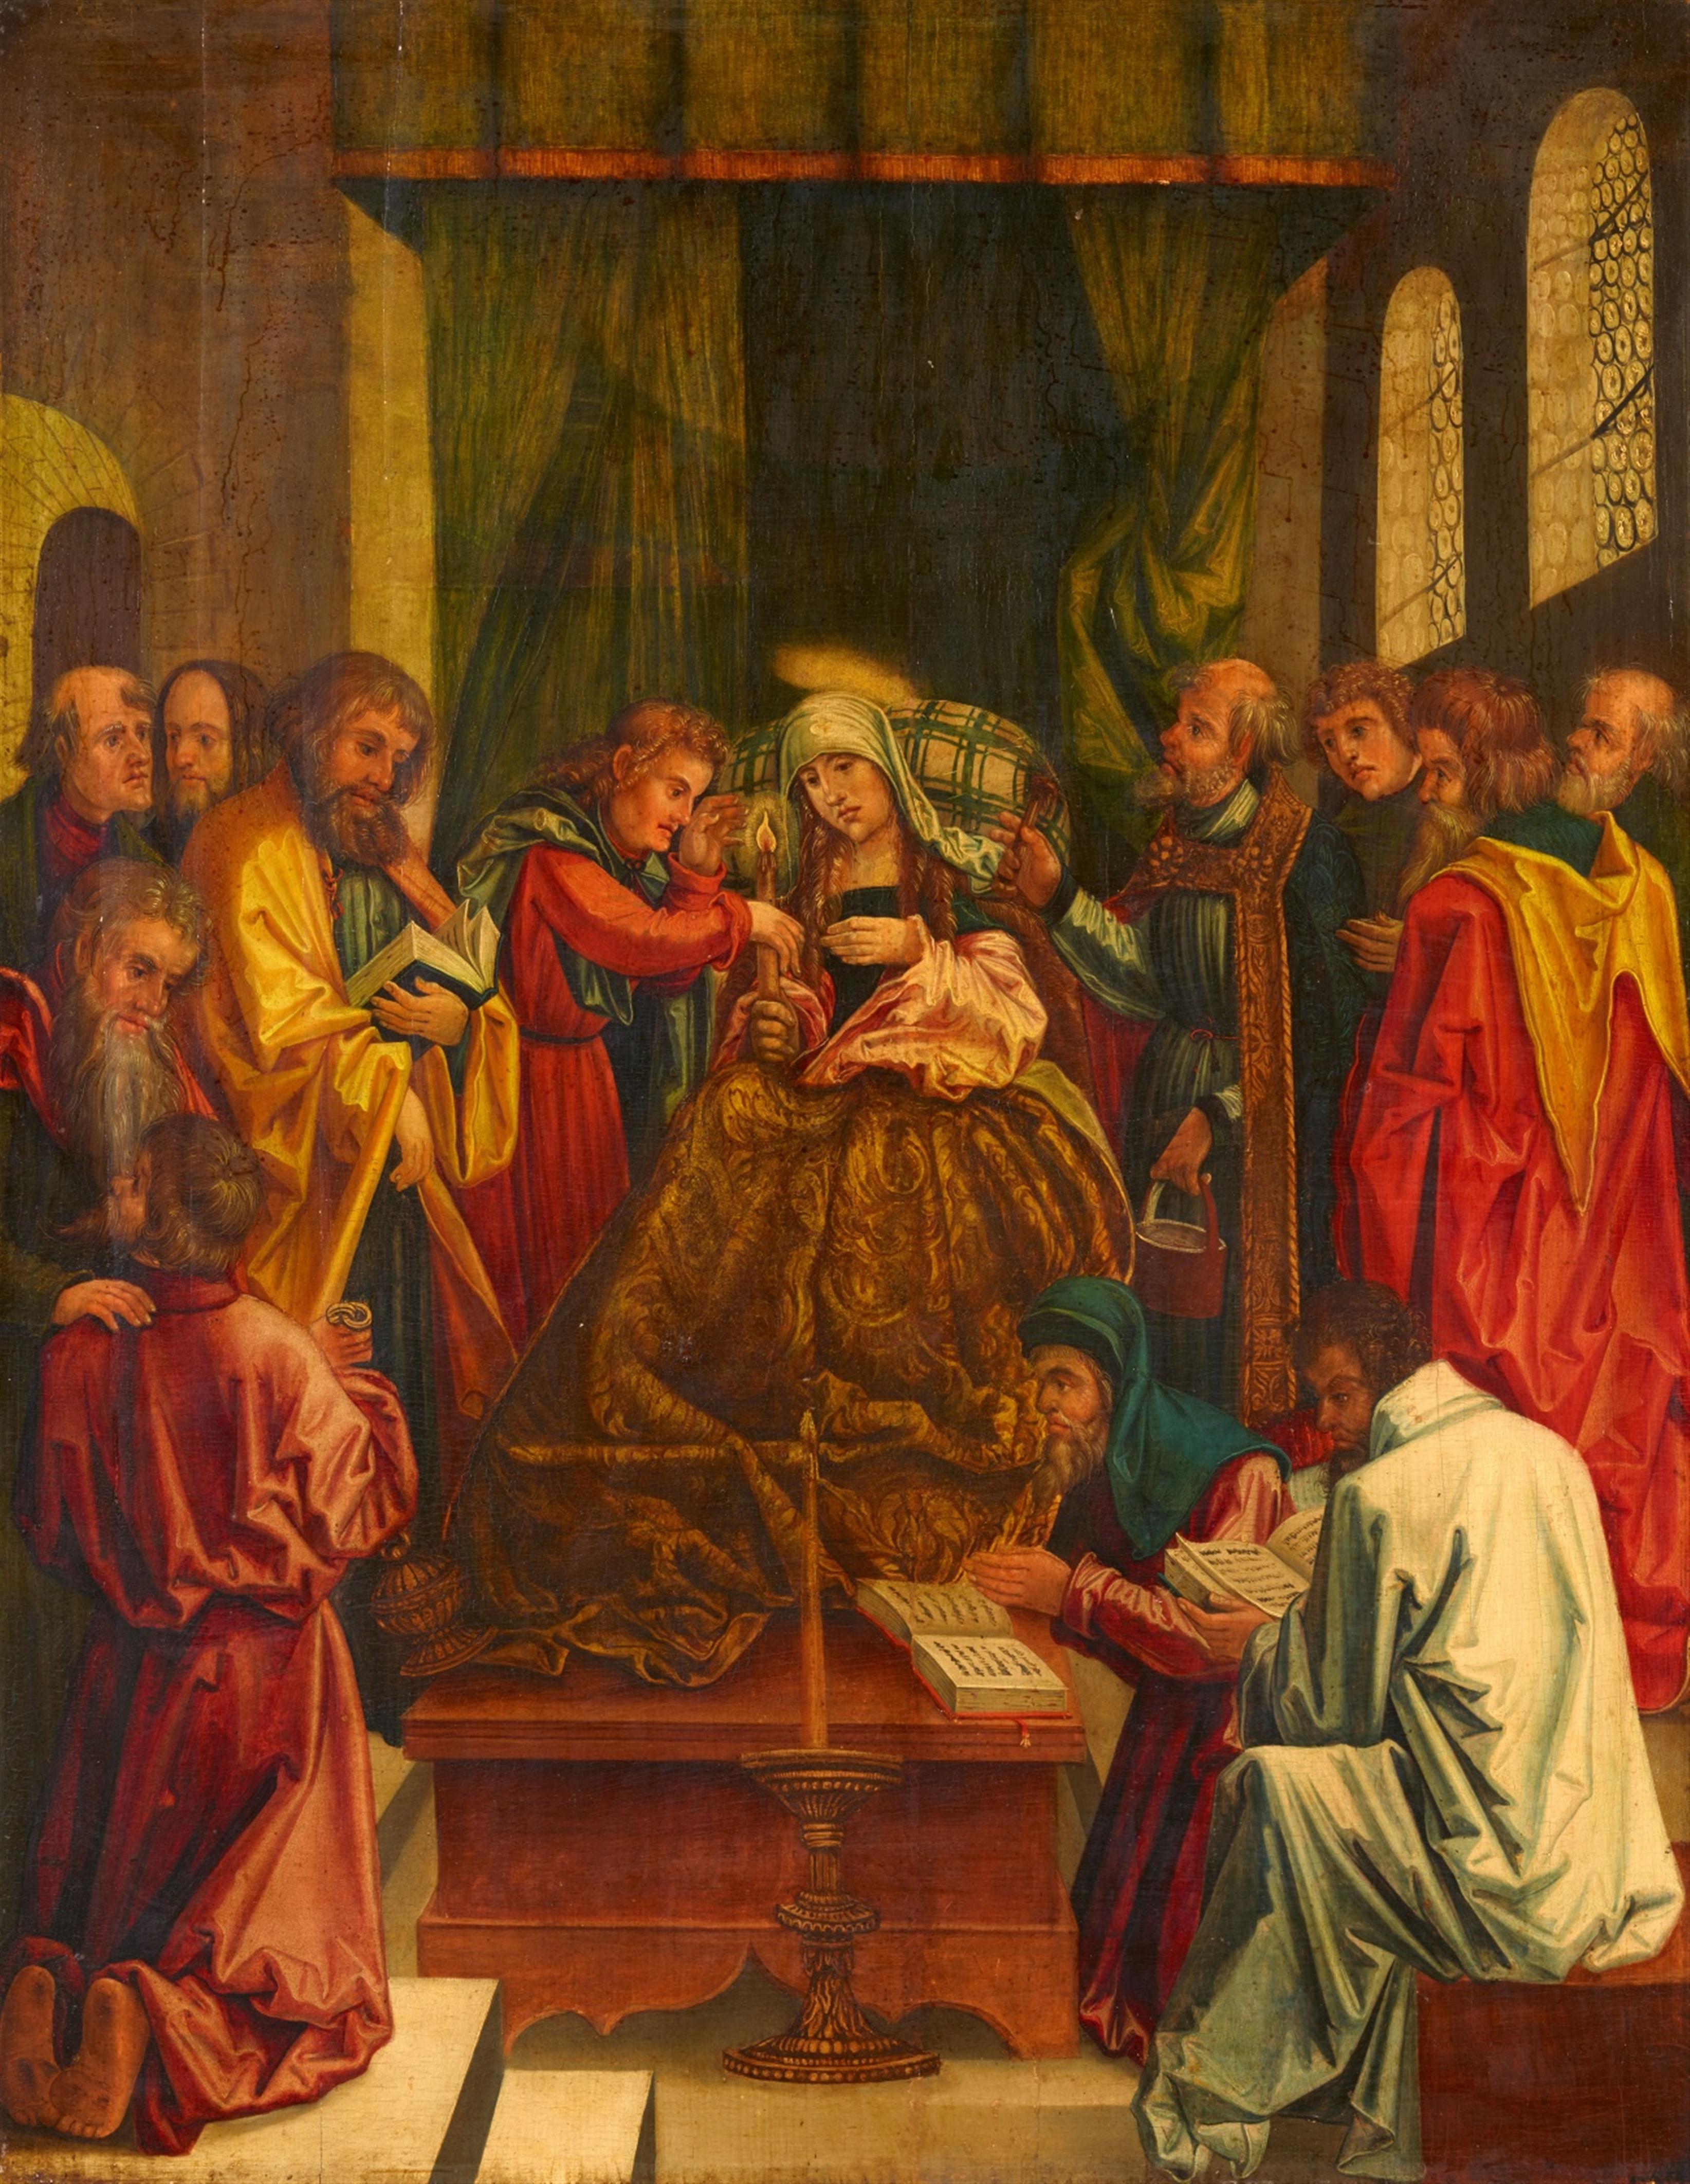 Melchior Feselen, attributed to - The Dormition of the Virgin - image-1